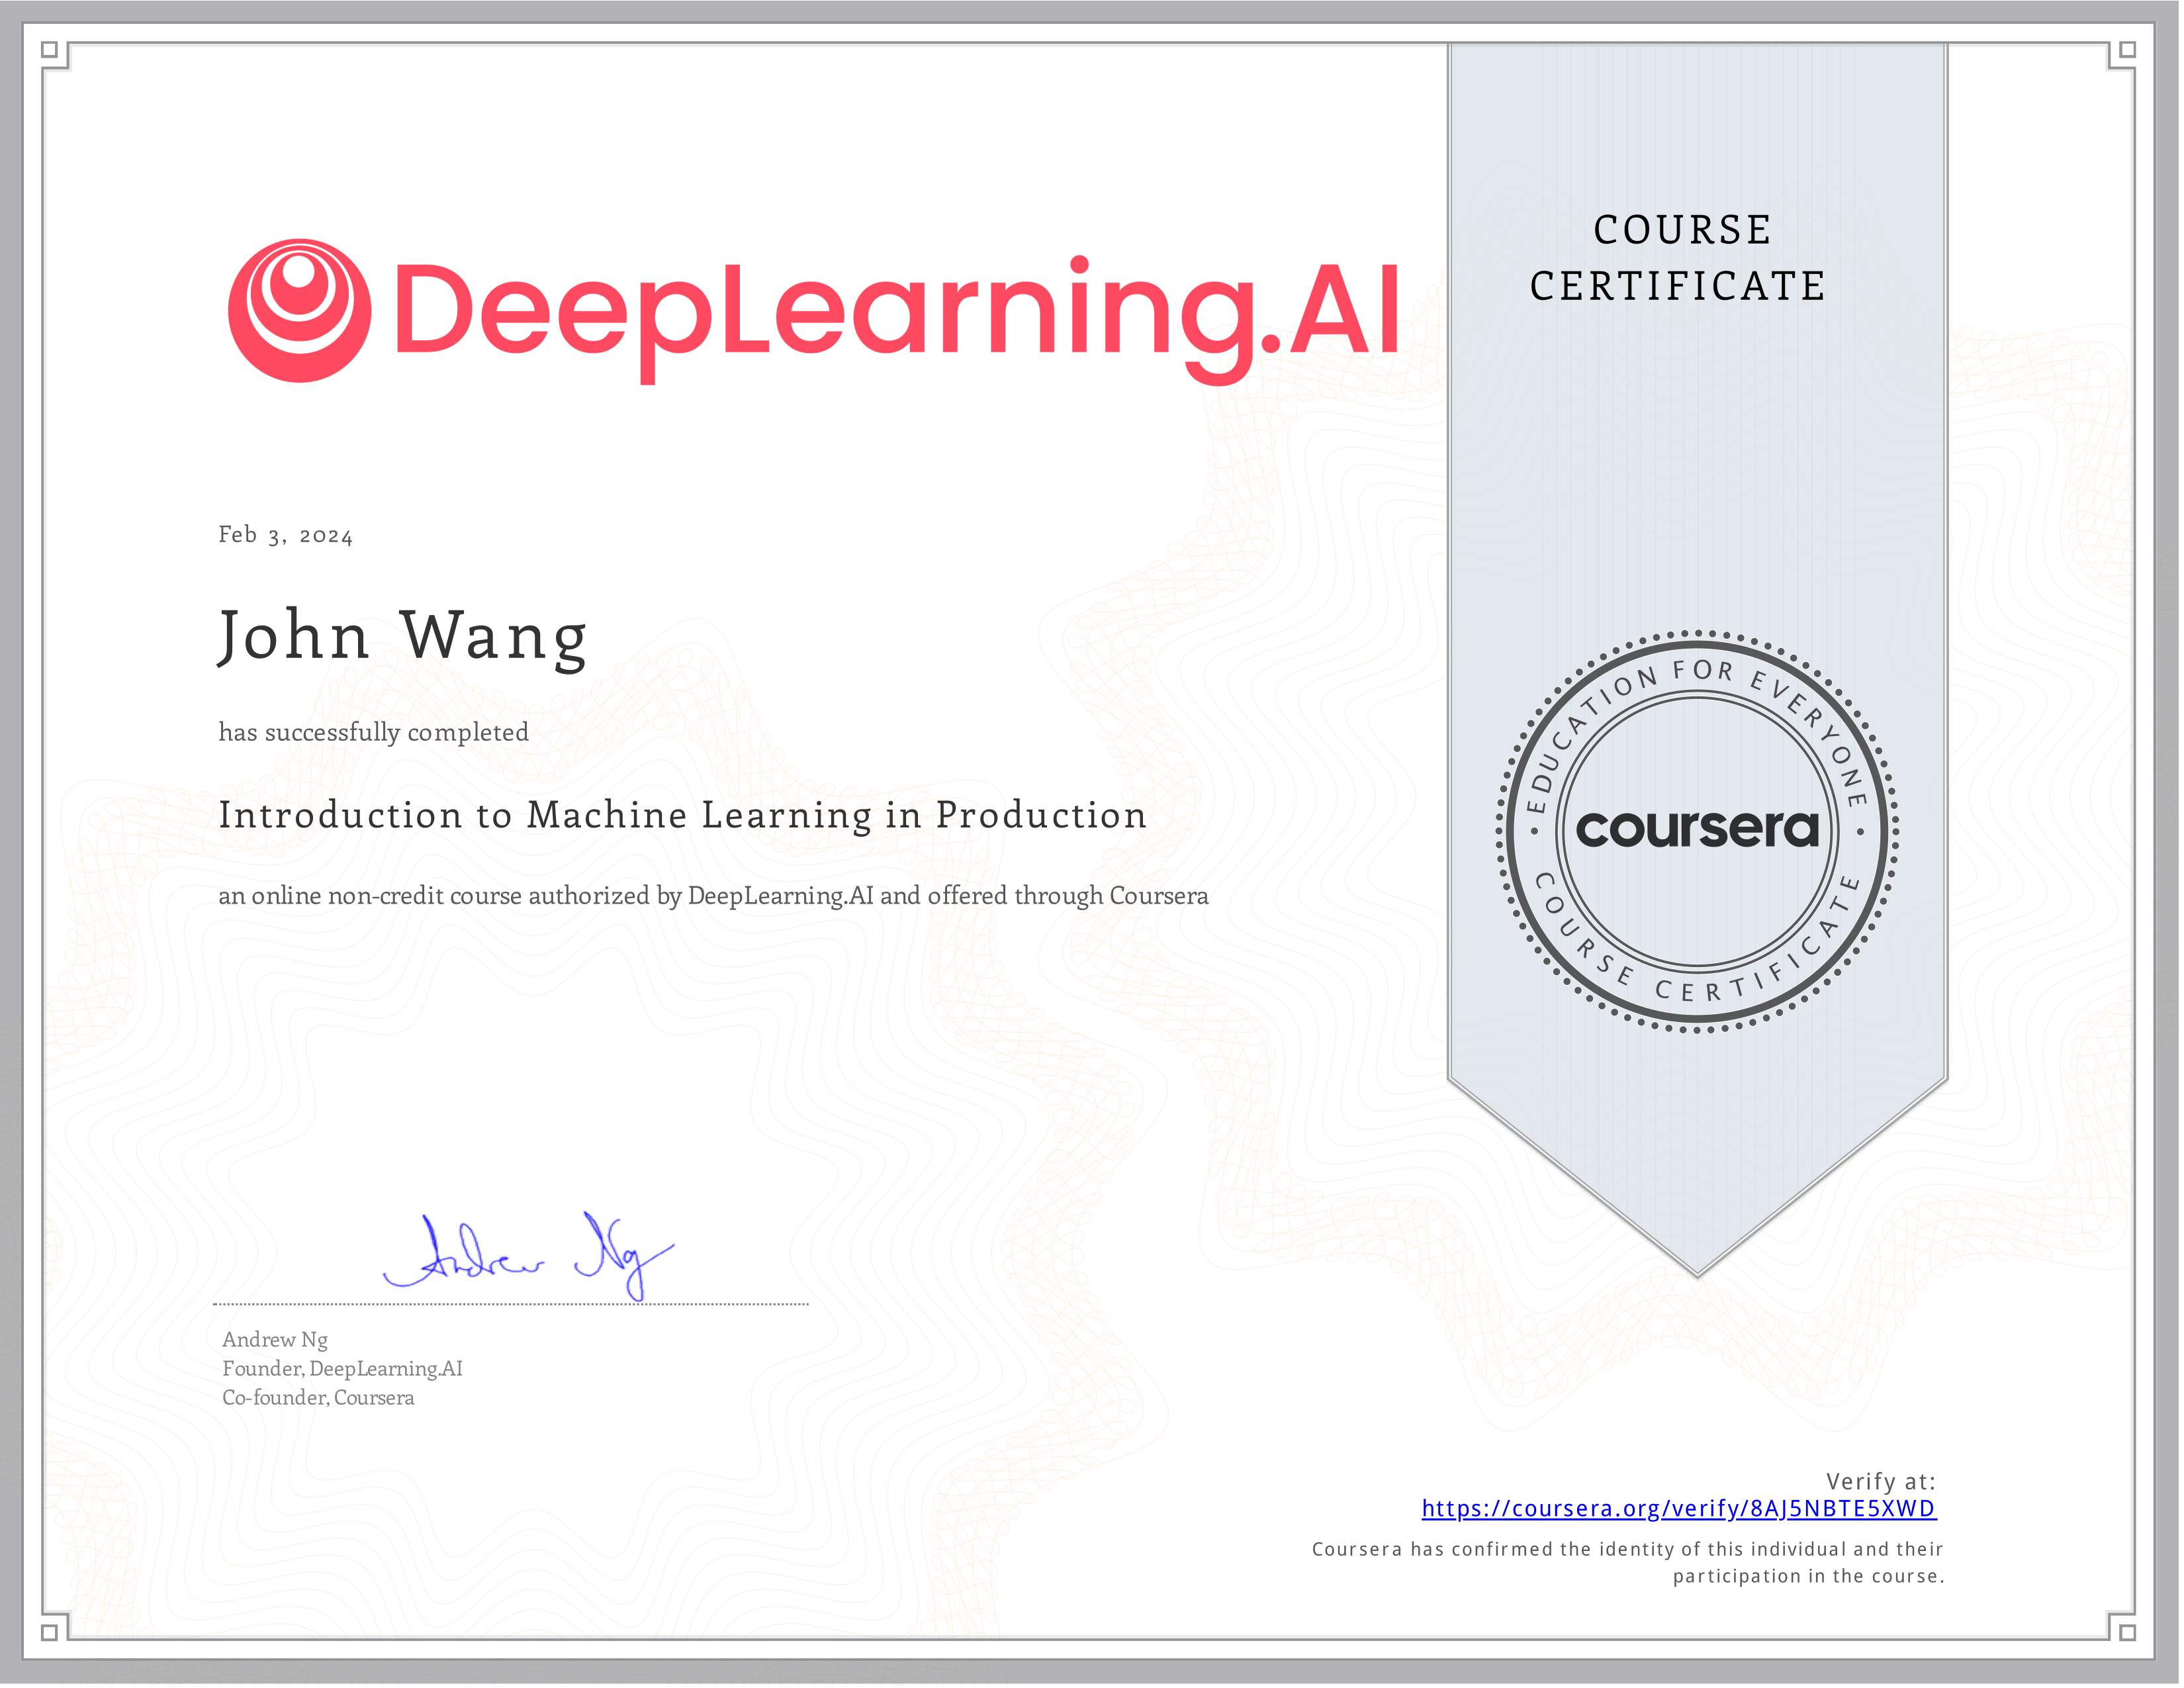 John's Introduction to Machine Learning in Production from DeepLearning.AI by Andrew Ng